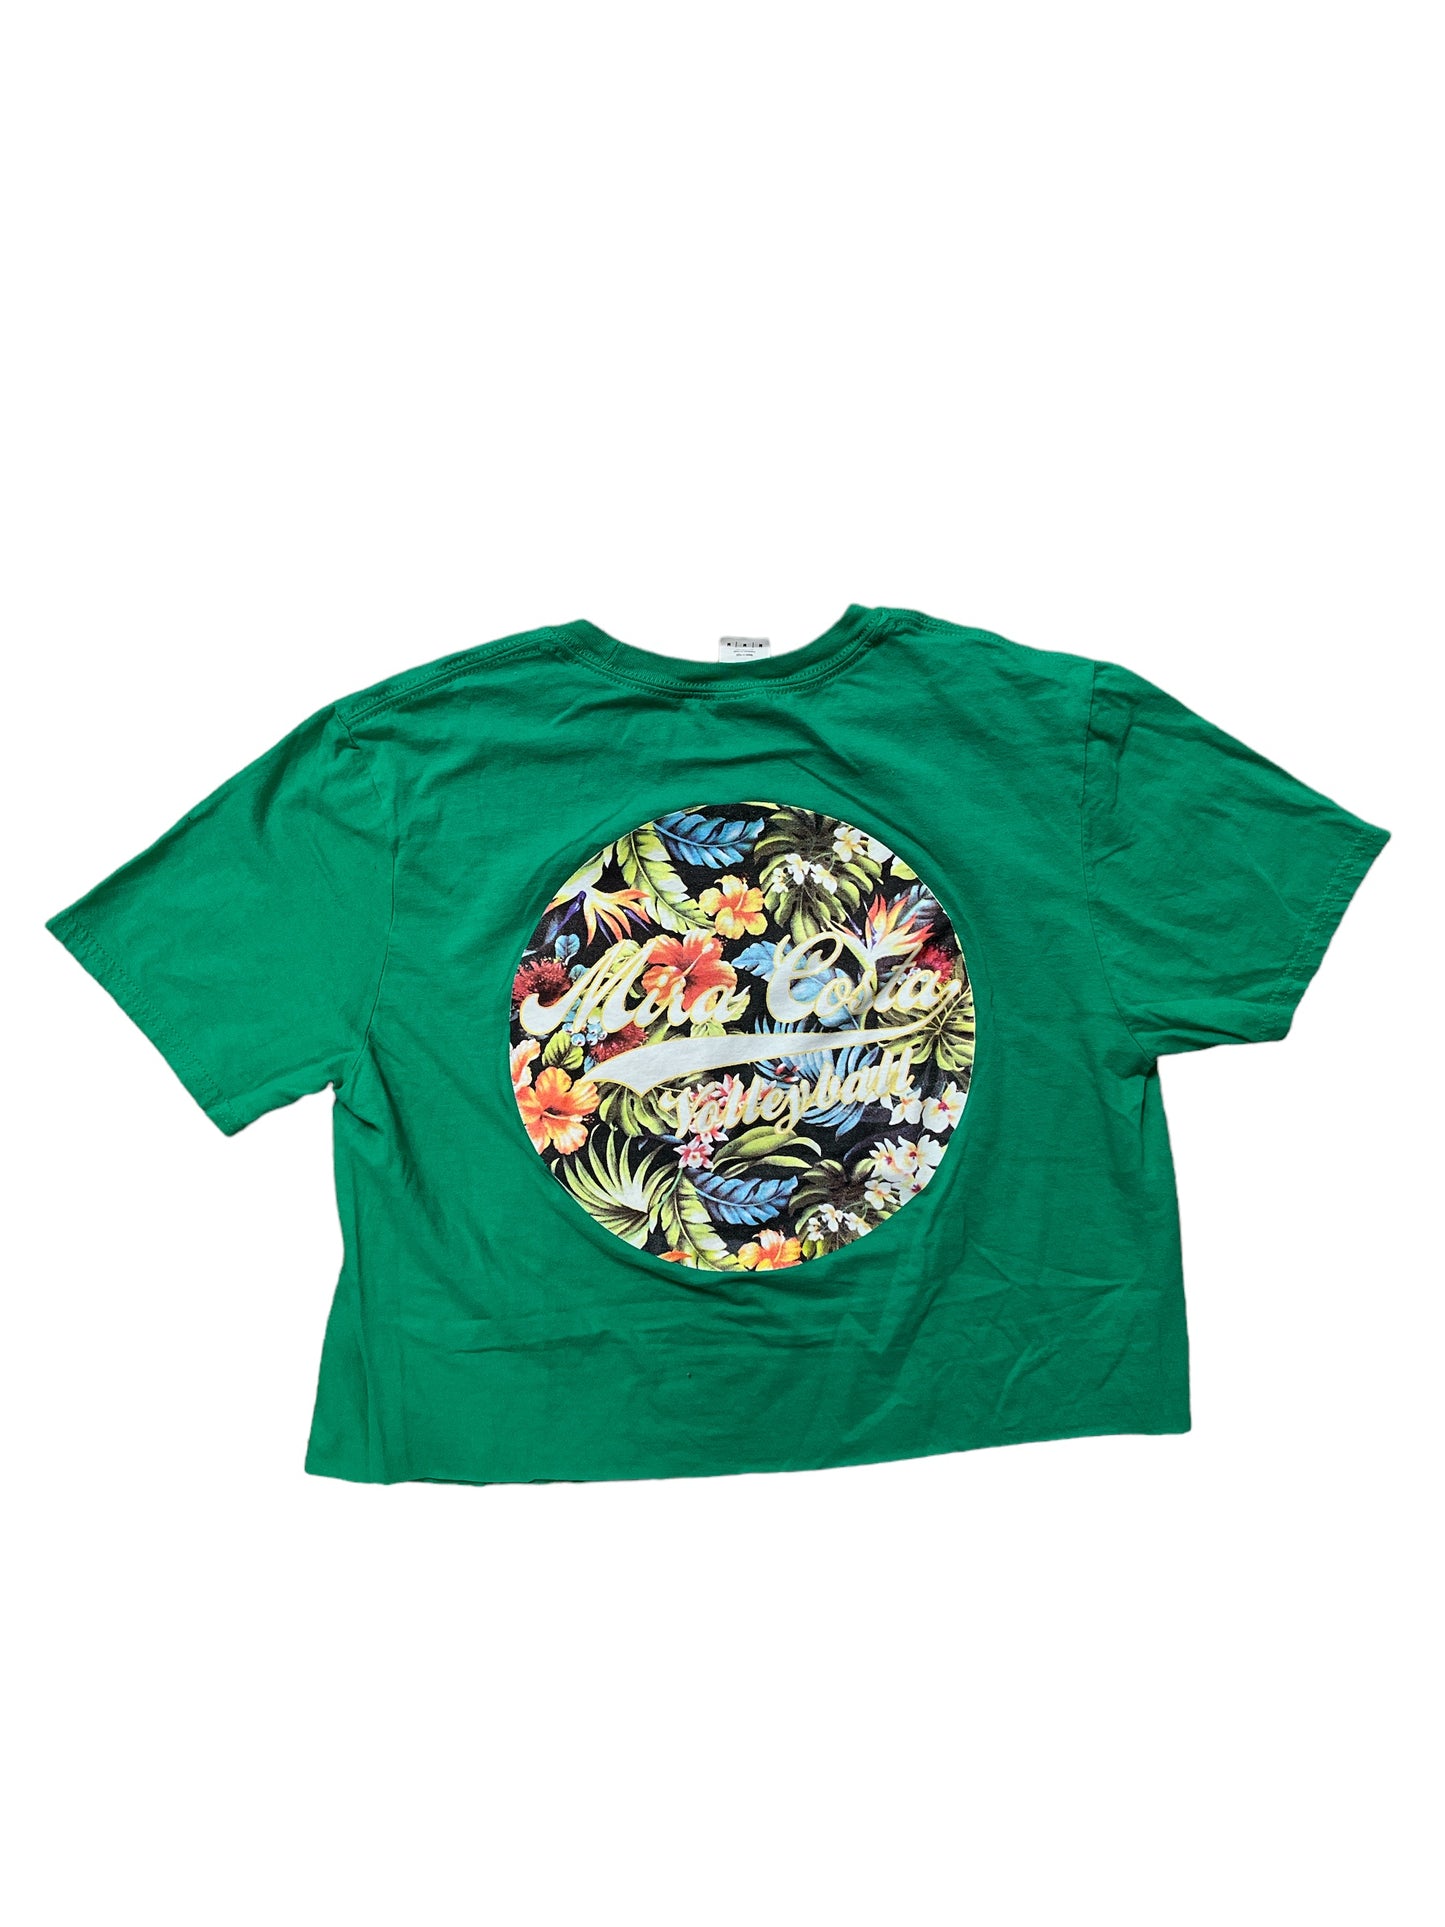 Cropped Graphic Tee - Green (M)